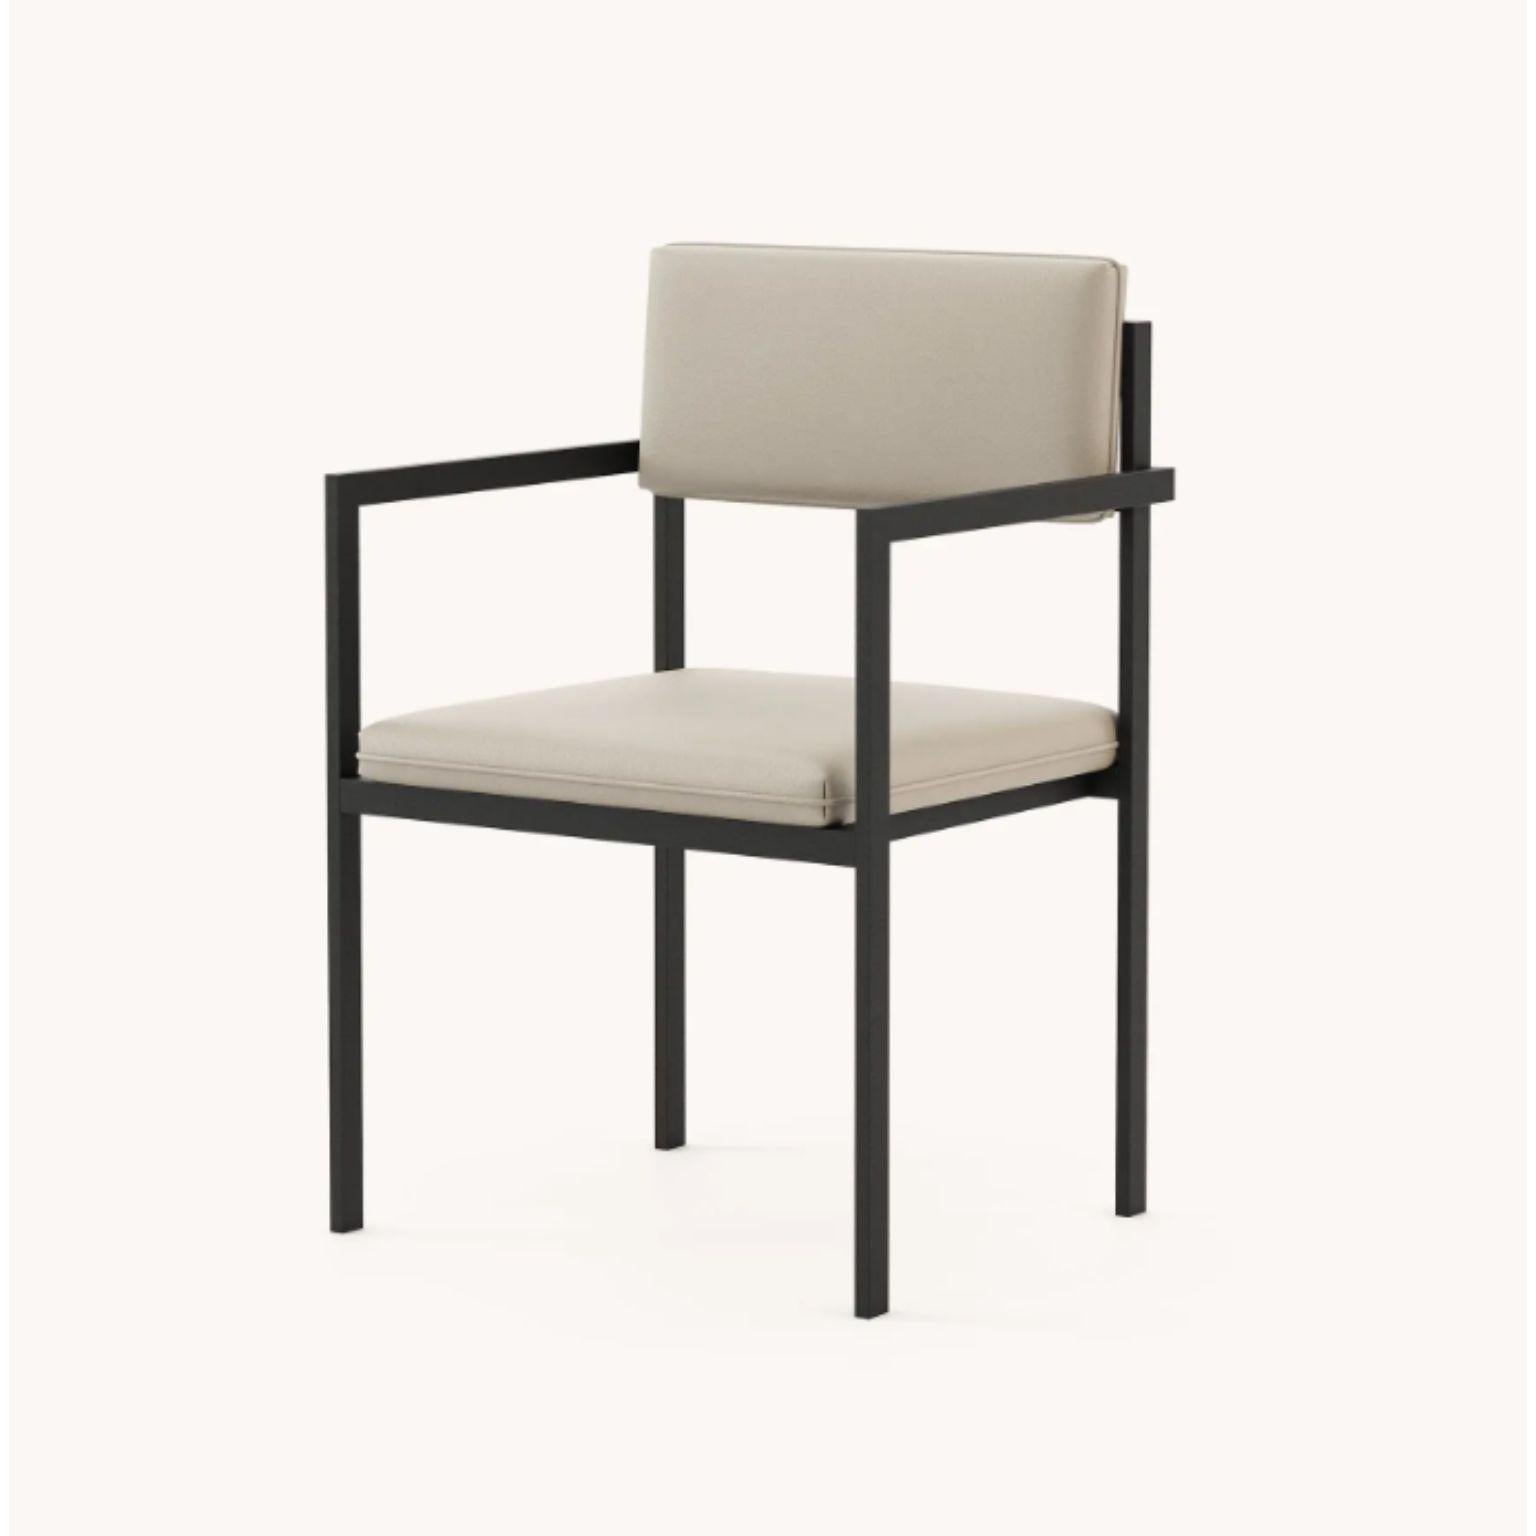 Bondi chair with armrest by Domkapa
Materials: black texturized steel, fabric (Nile Ivory).
Dimensions: W 48 x D 50 x H 86 cm.
Also available in different materials. 

Bondi Chair reflects a special lifestyle collection characterized by organic